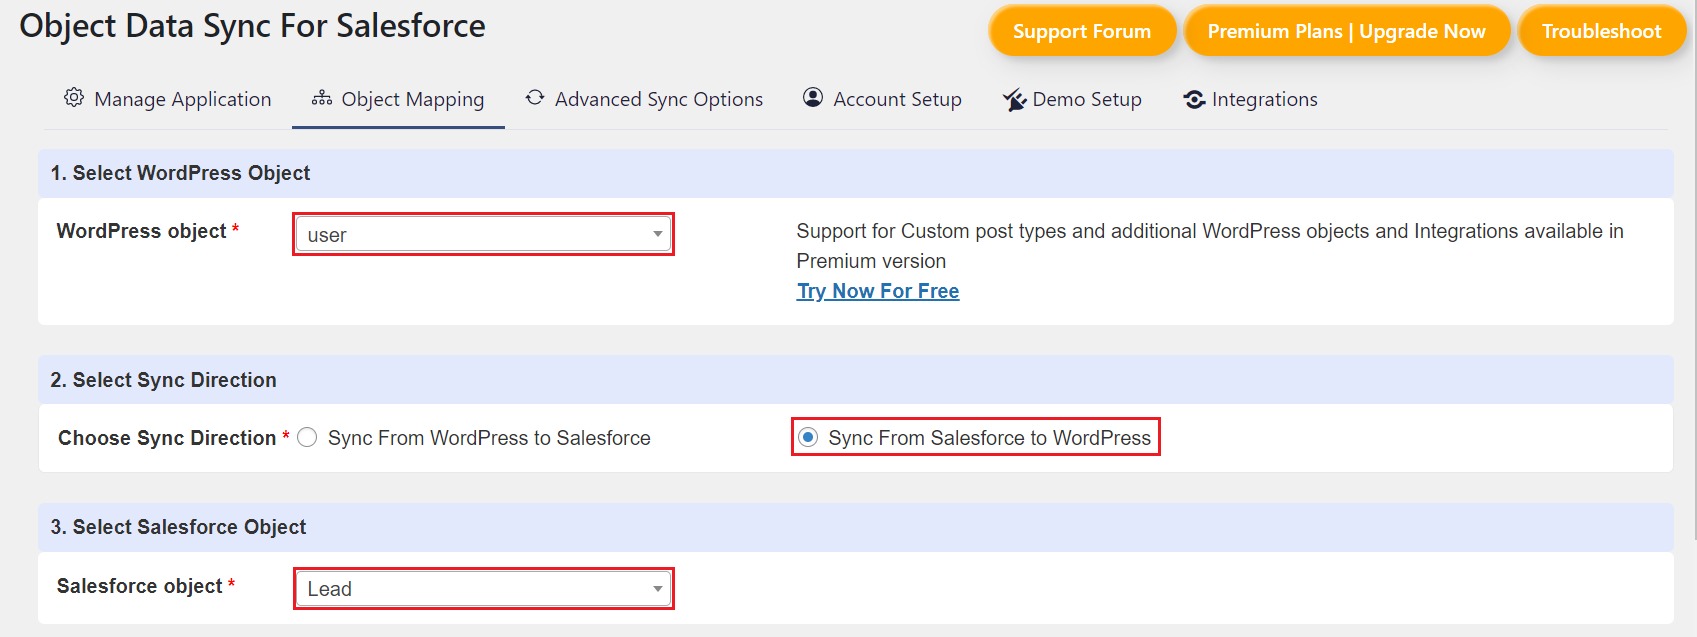  Salesforce to WP real time sync | Mapping Configuration